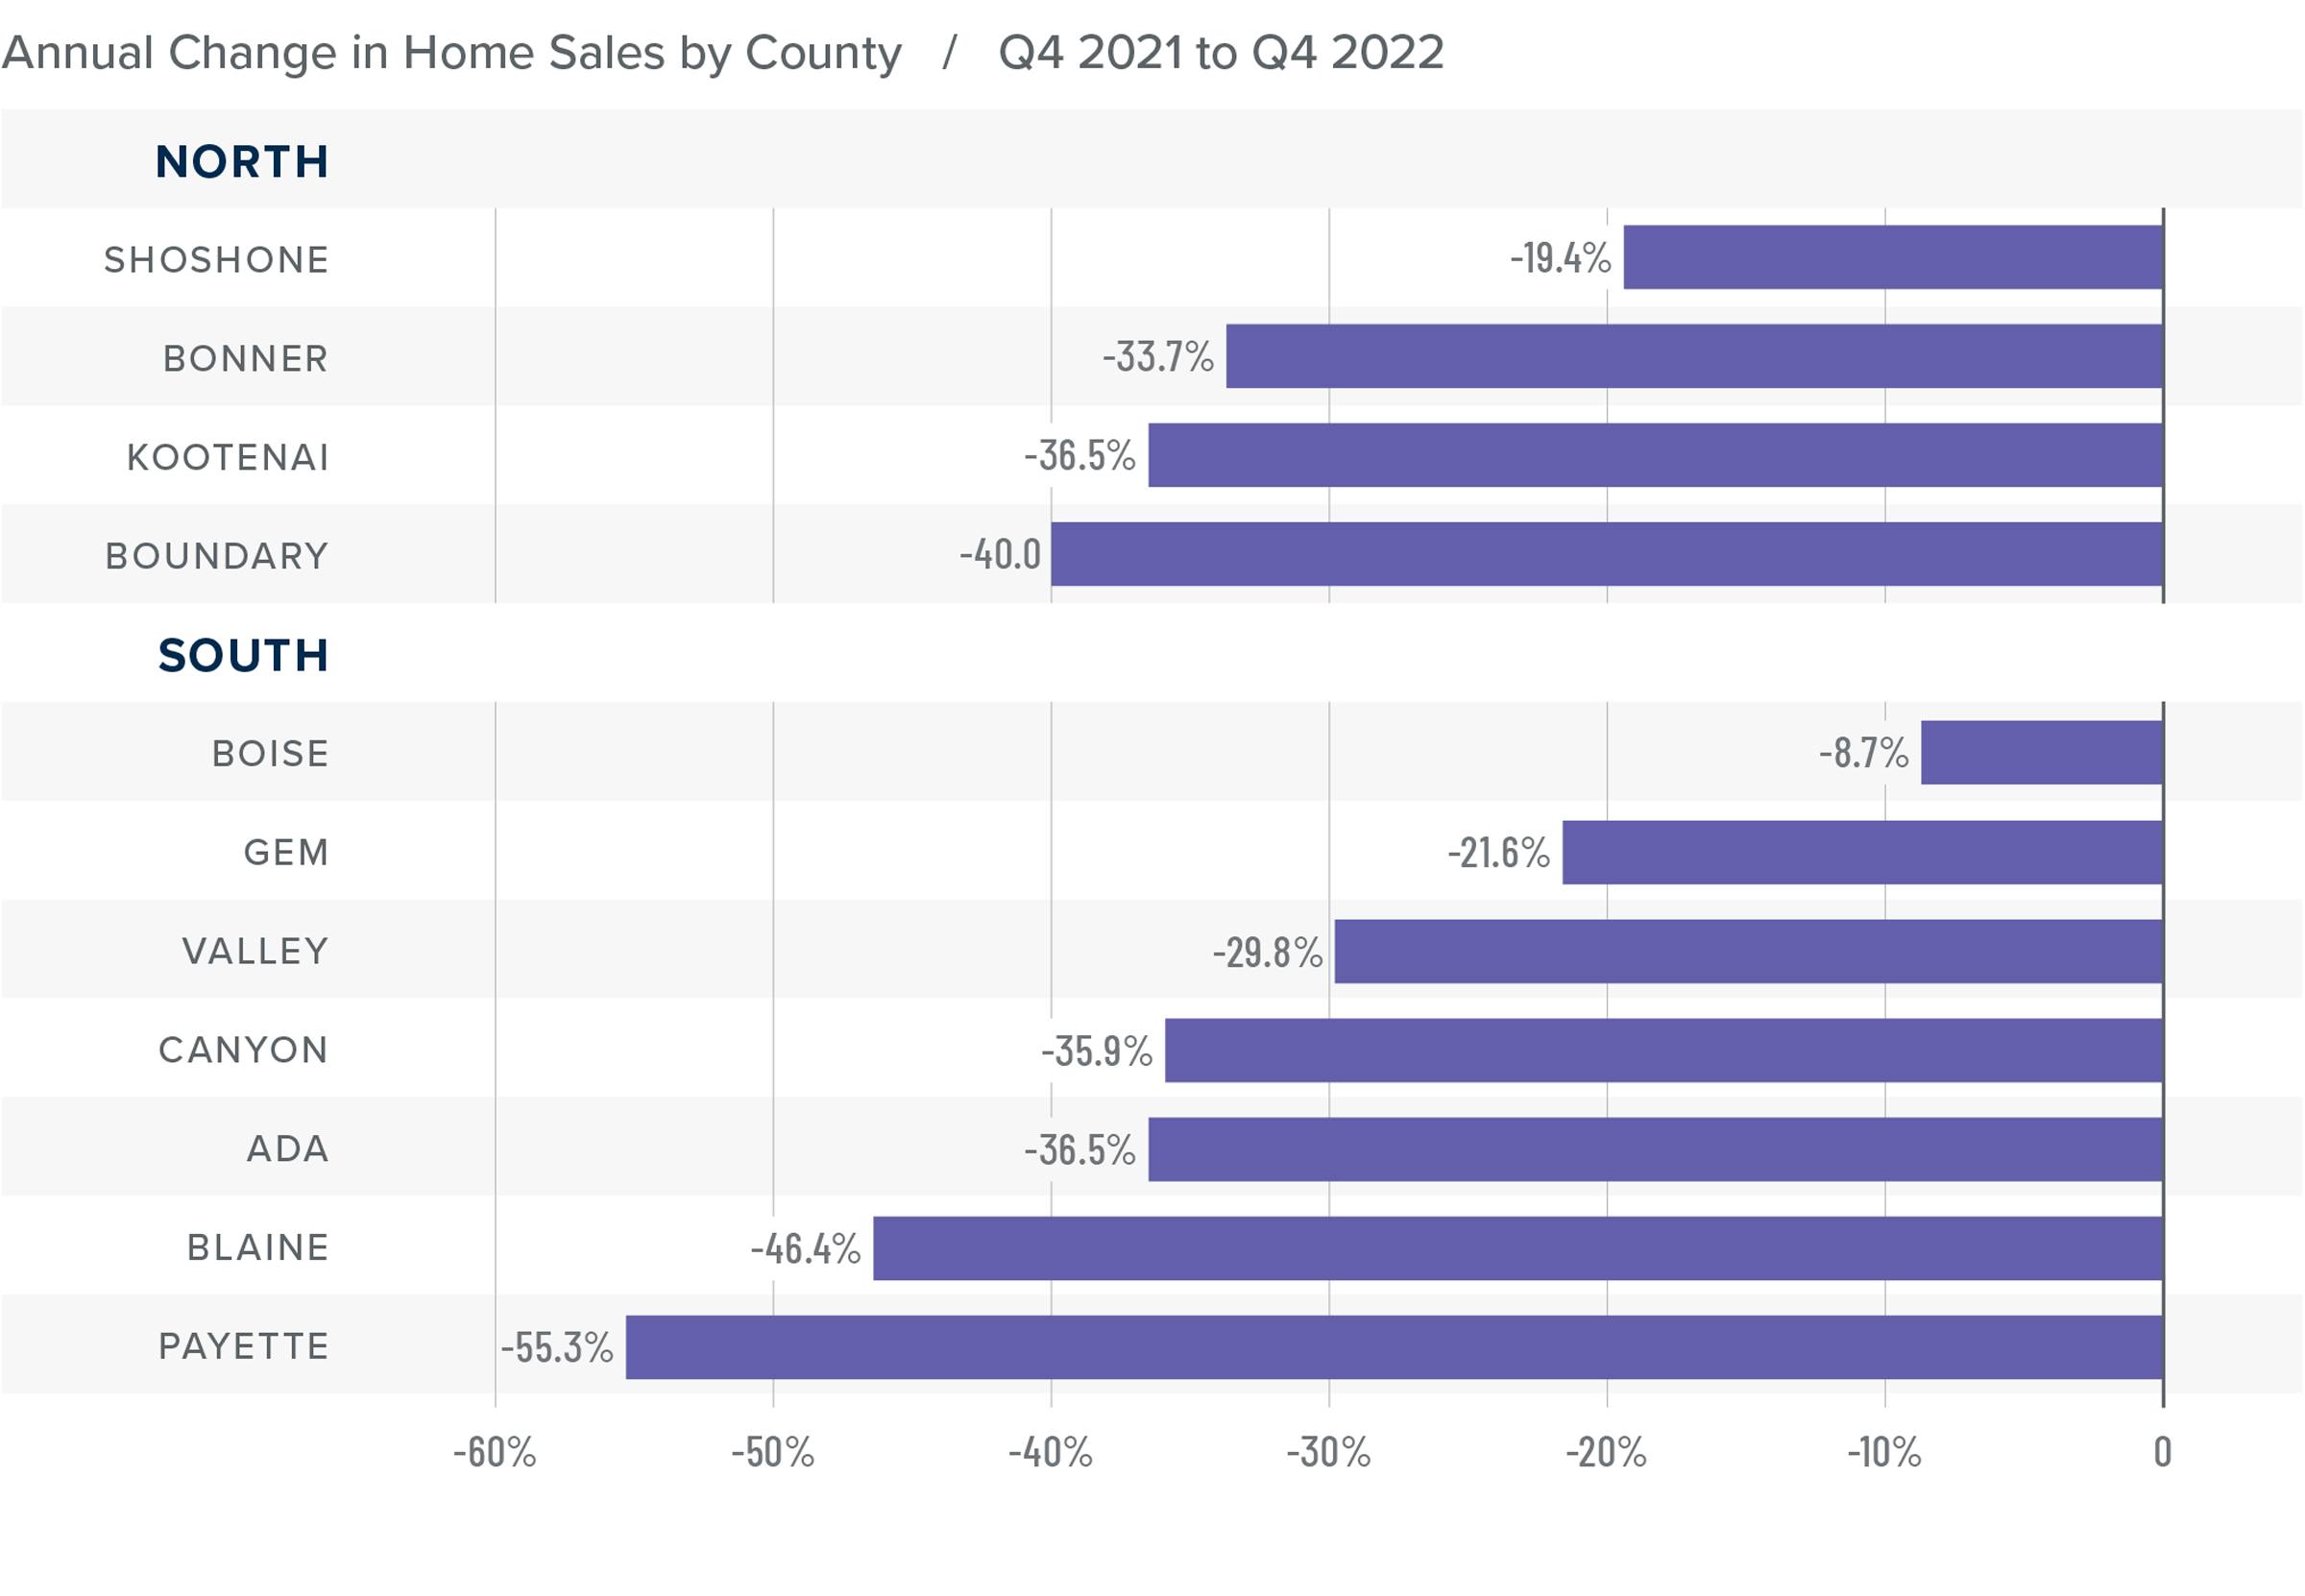 A bar graph showing the annual change in home sales for various counties in North and South Idaho from Q4 2021 to Q4 2022. All counties have a negative percentage year-over-year change. Here are the totals for North Idaho: Shoshone at -19.4%, Bonner at -33.7%, Kootenai at -36.5%, and Boundary -40%. In South Idaho: Boise at -8.7%, Gem at -21.6%, Valley at -29.8%, Canyon at -35.9%, Ada at -36.5%, Blaine at -46.4%, and Payette at -55.3%.